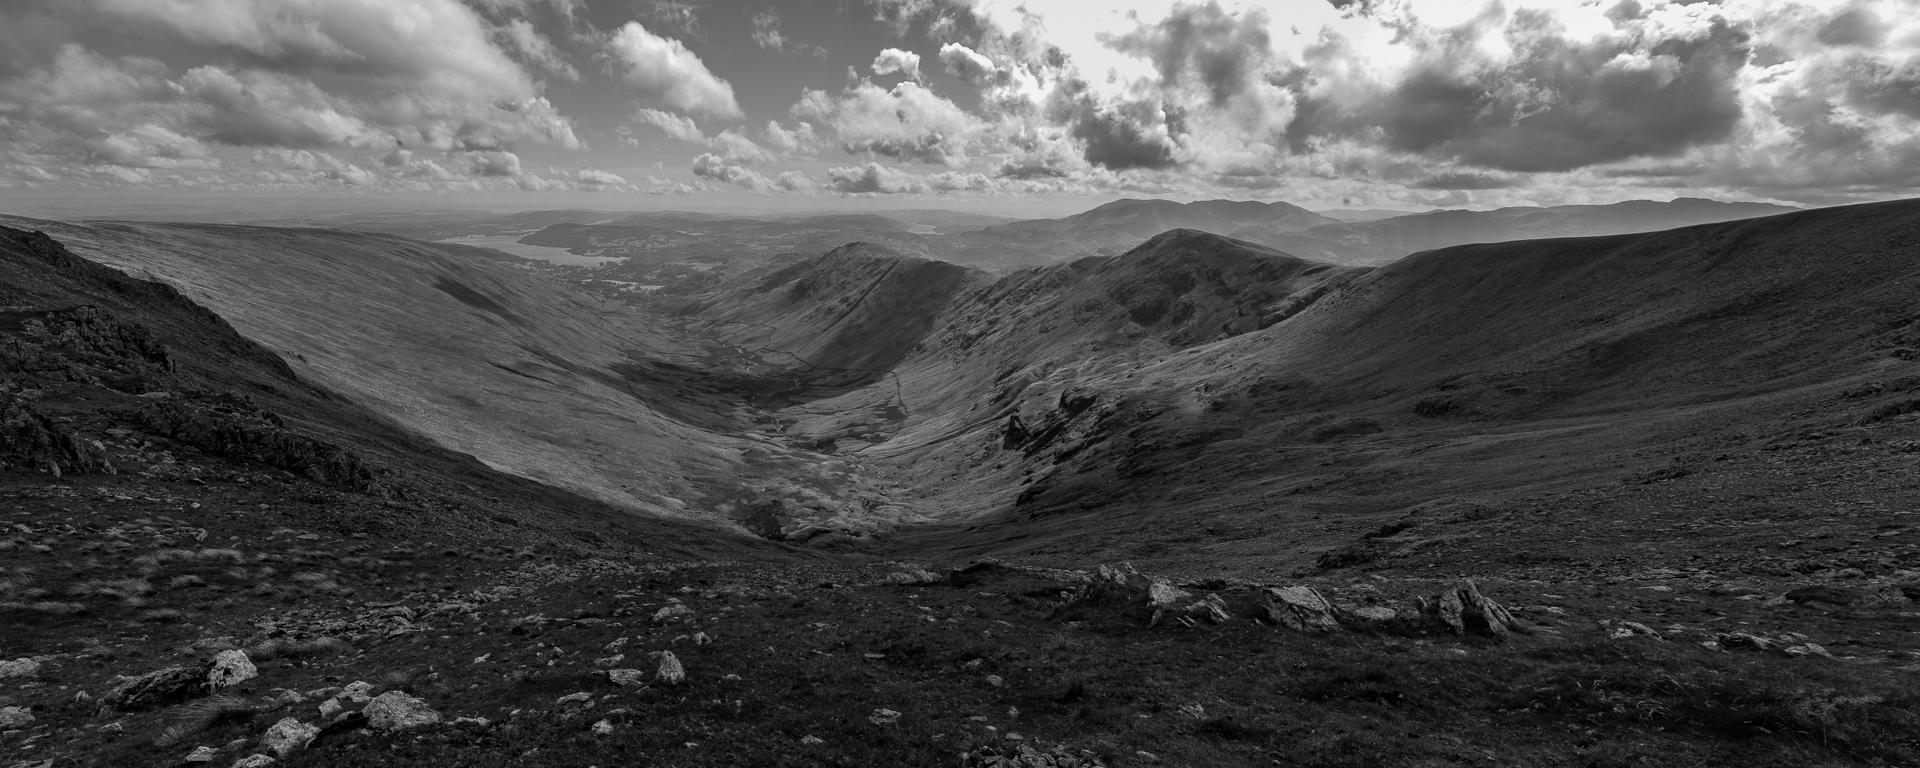 The view from the top of St Sunday's Crag, Grasmere township is to the right, and Grasmere lake in the distance.